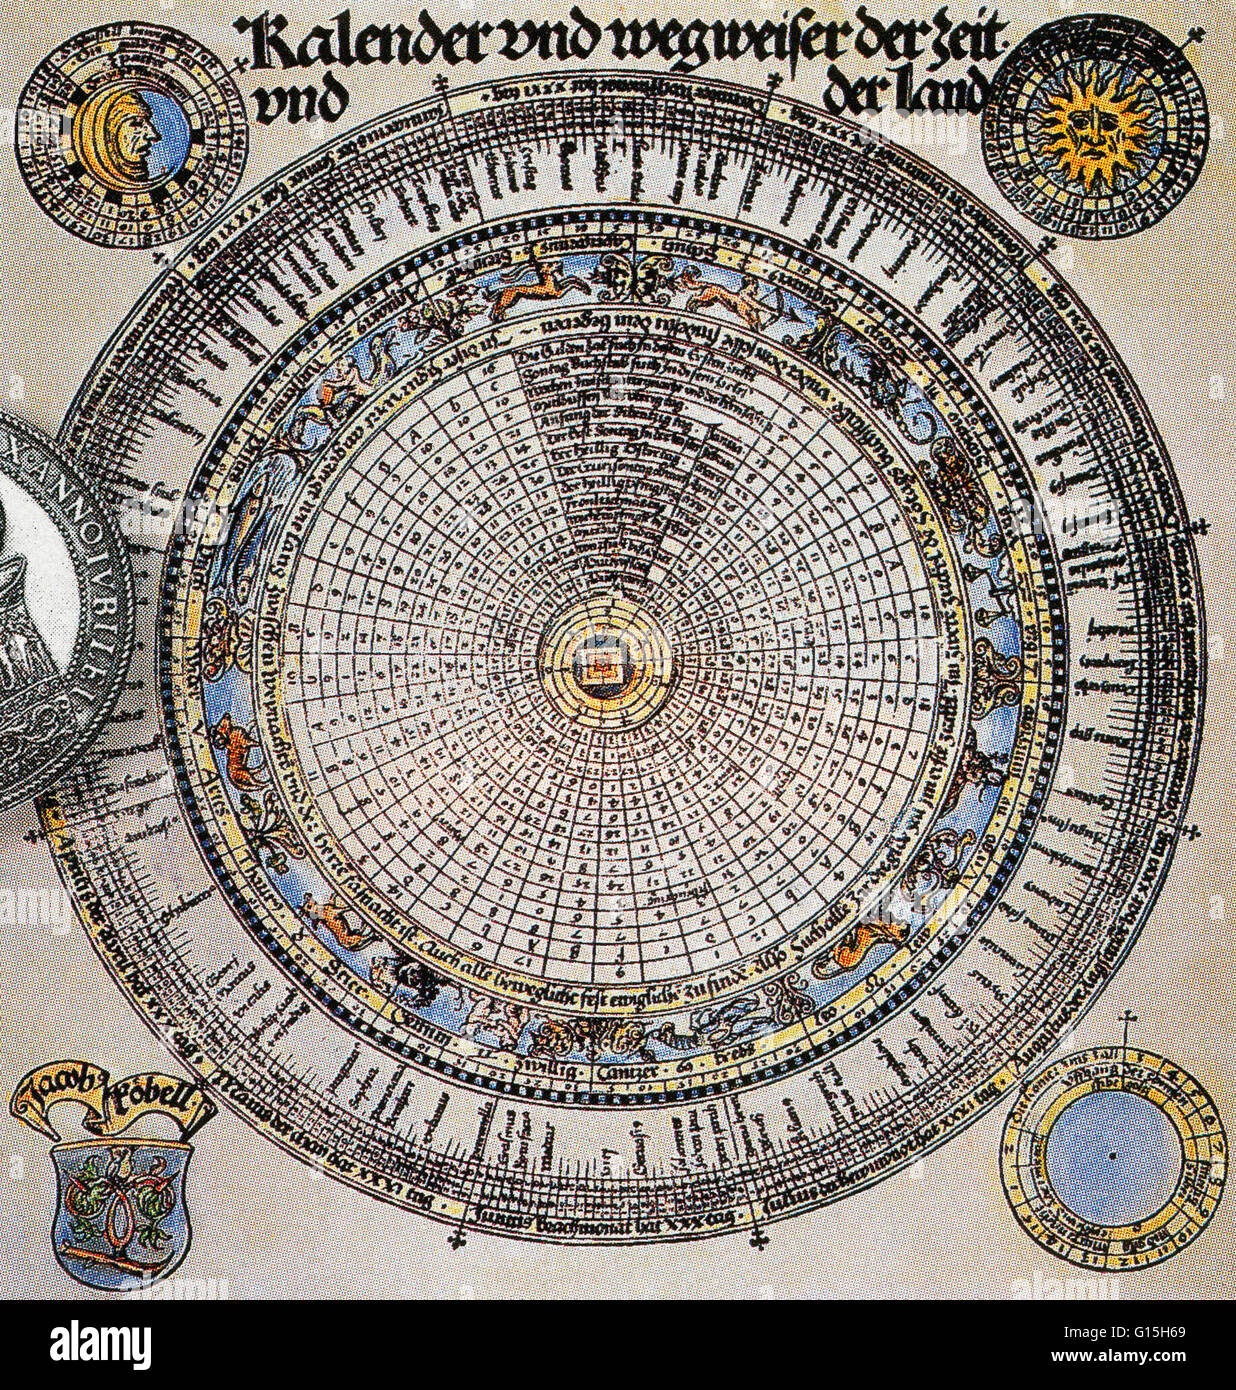 The Gregorian calendar (Western calendar, Christian calendar) is the solar calendar in use throughout most of the world. It was sponsored by Pope Gregory XIII in 1582 as a corrected version of the Julian calendar. The ordinary year is made to consist of 3 Stock Photo